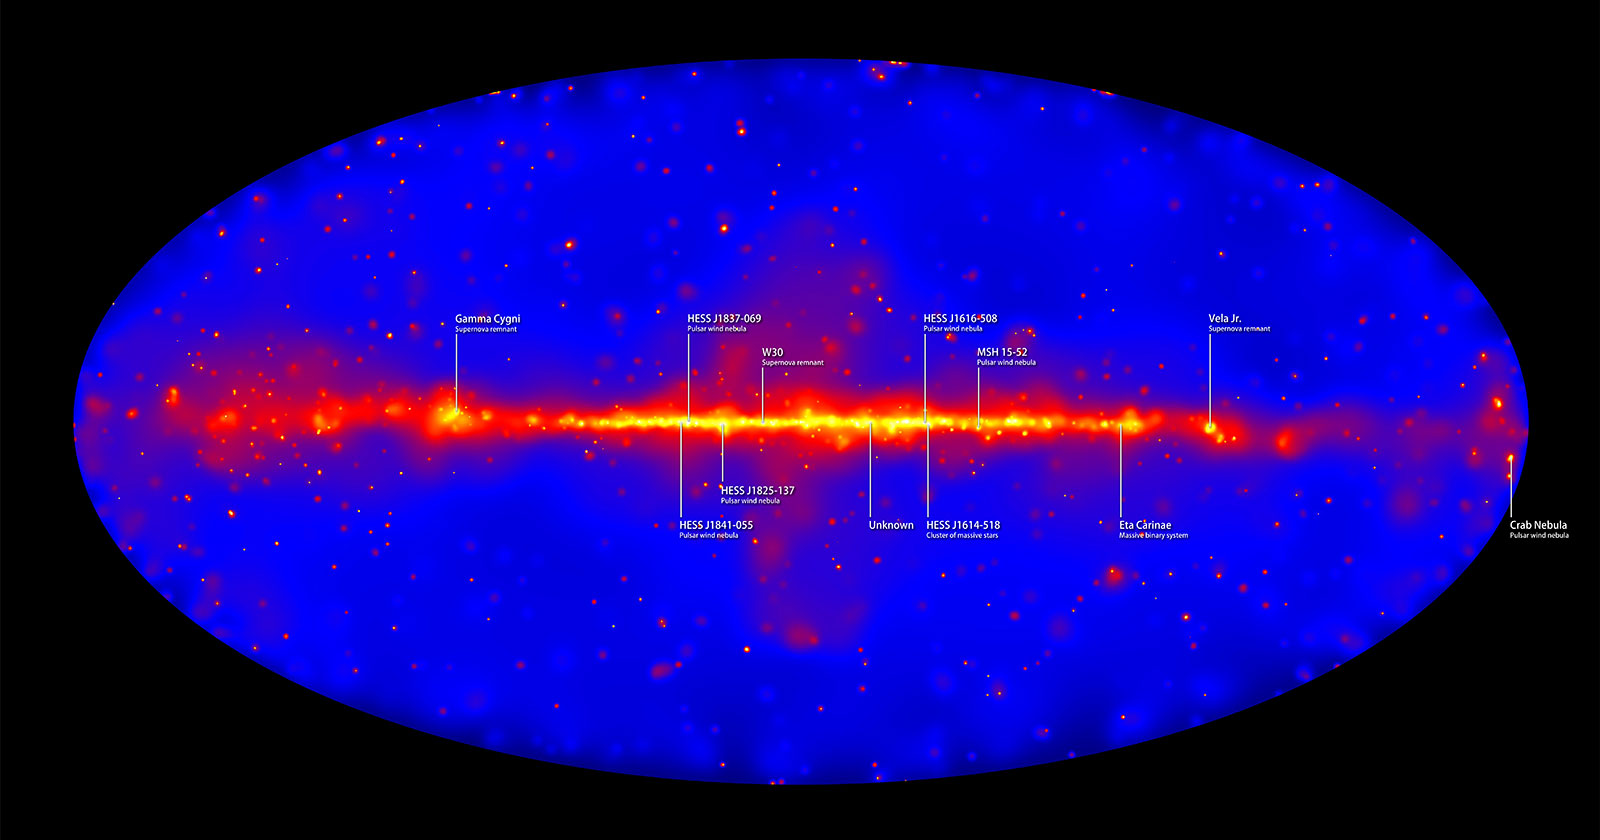 Band of bright red light representing high energy concentrations in our galaxy with labels showing specific points.